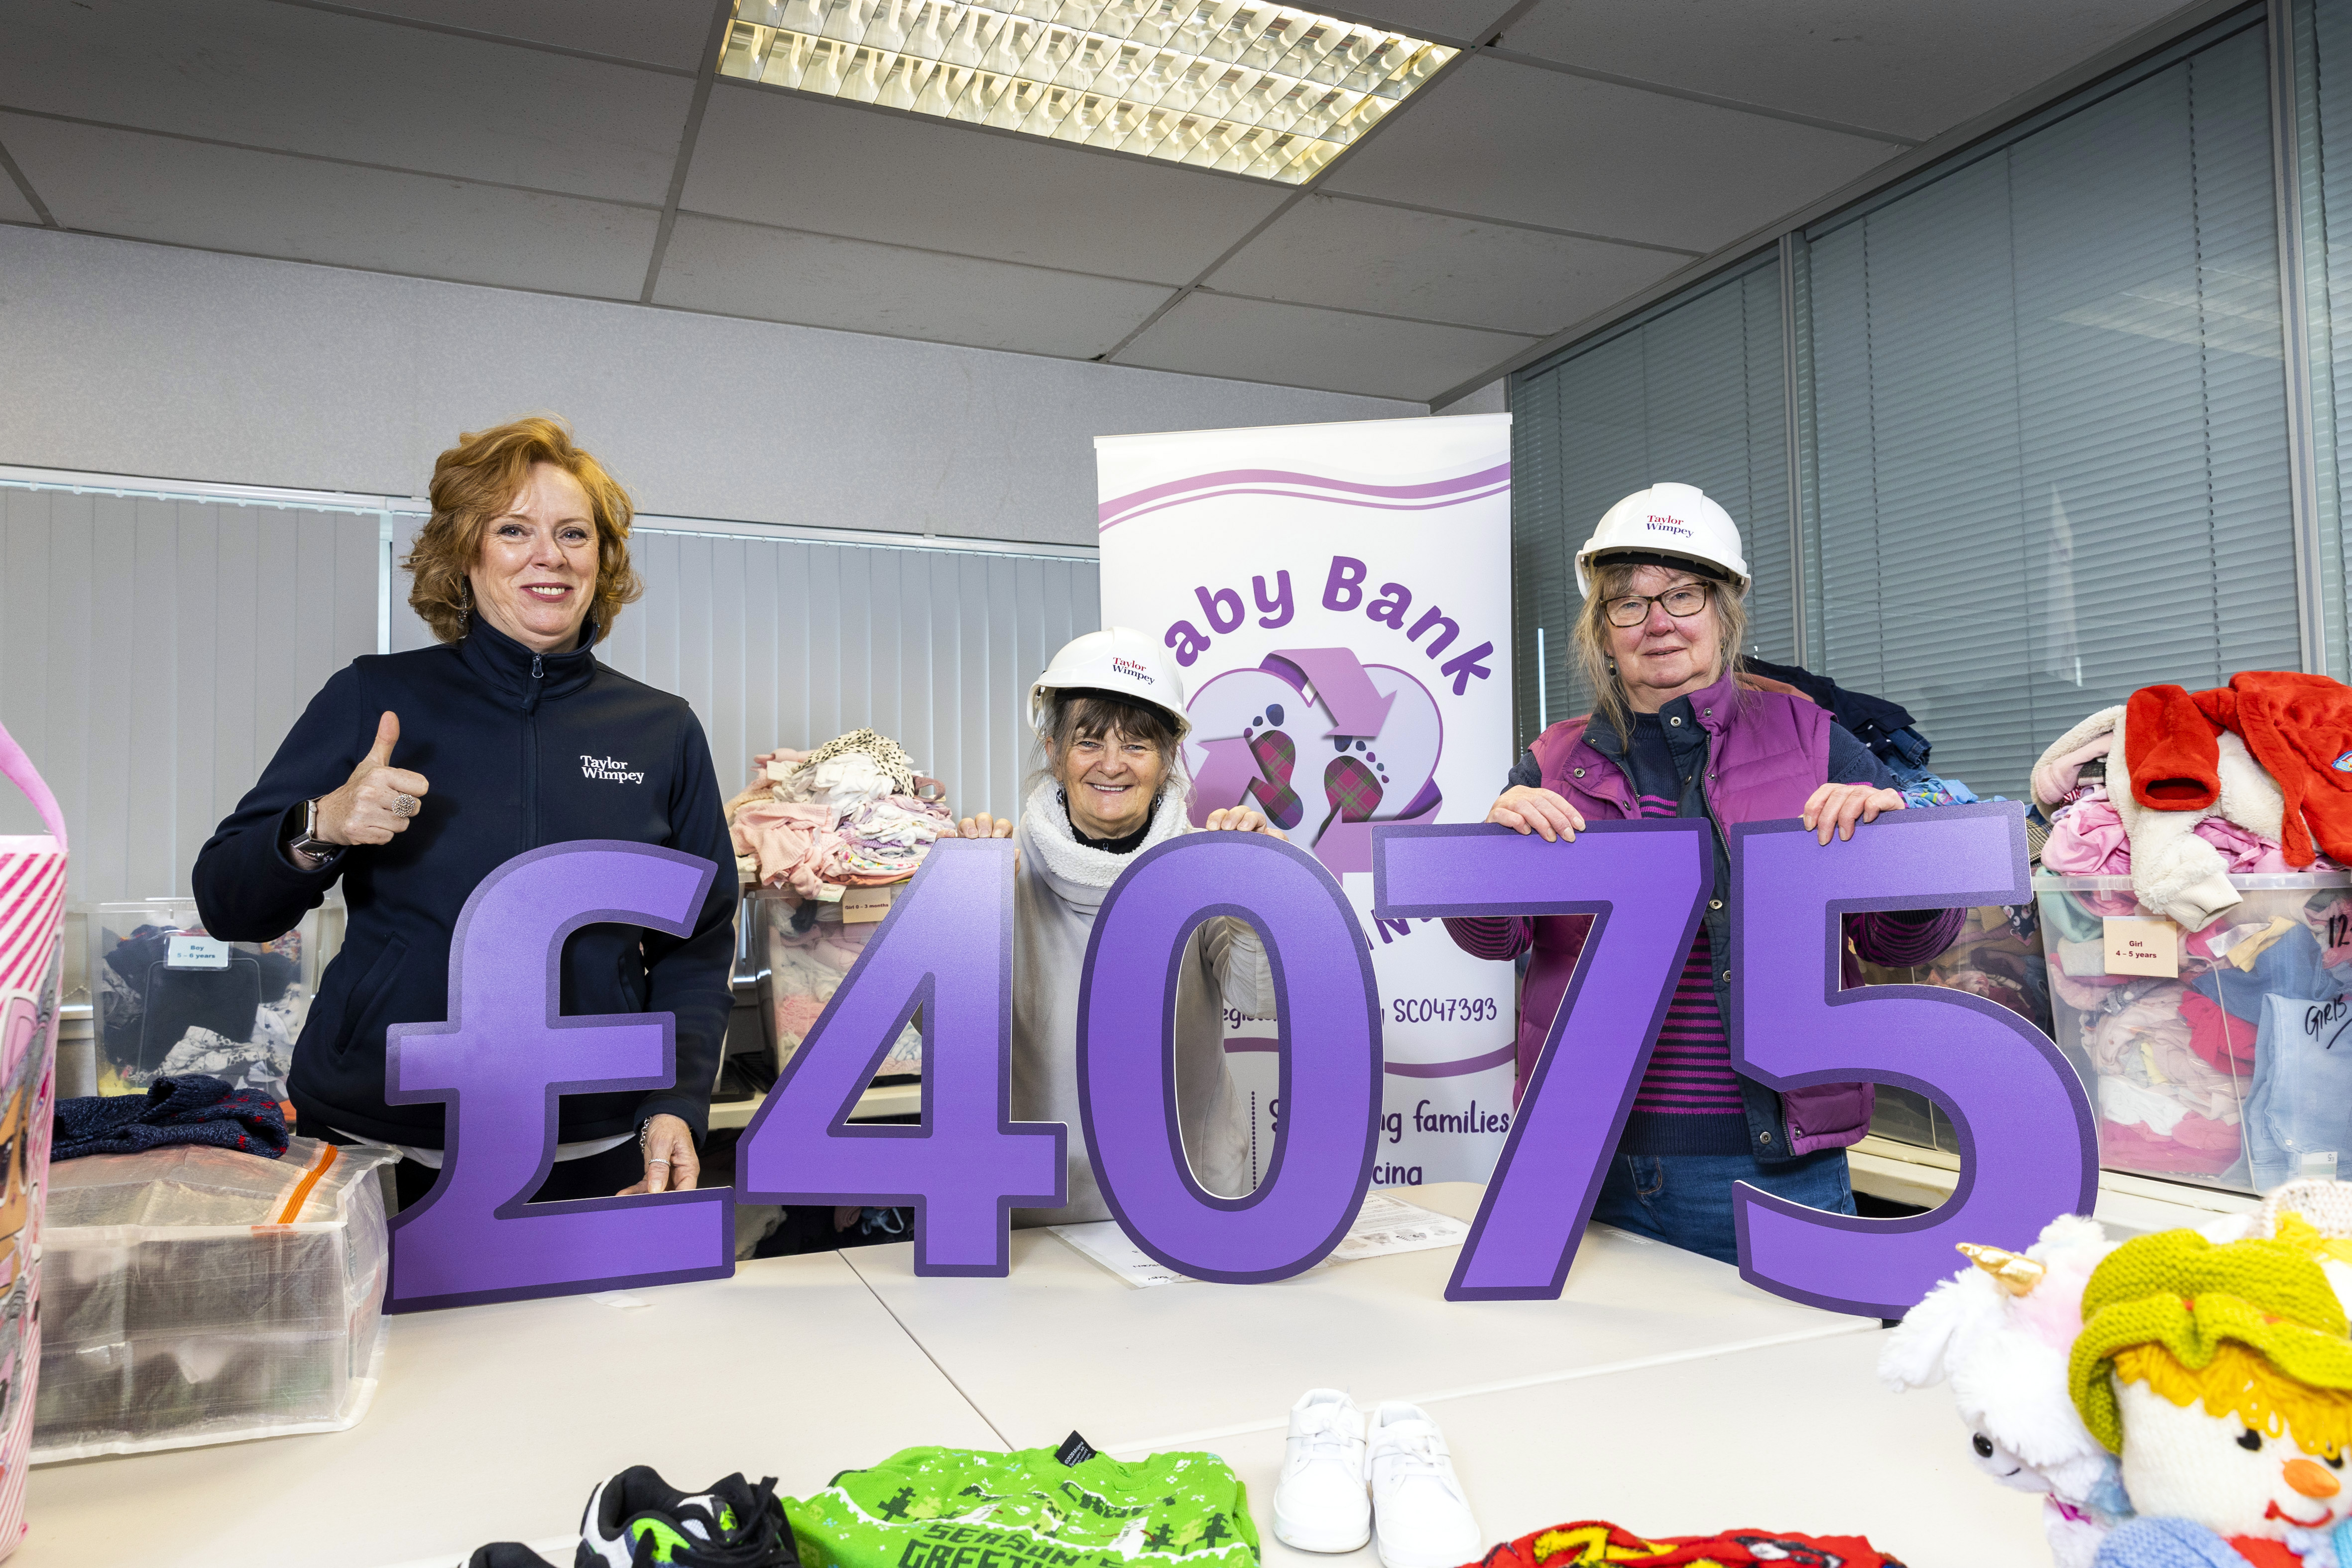 Taylor Wimpey announces partnership with Baby Bank Scotland